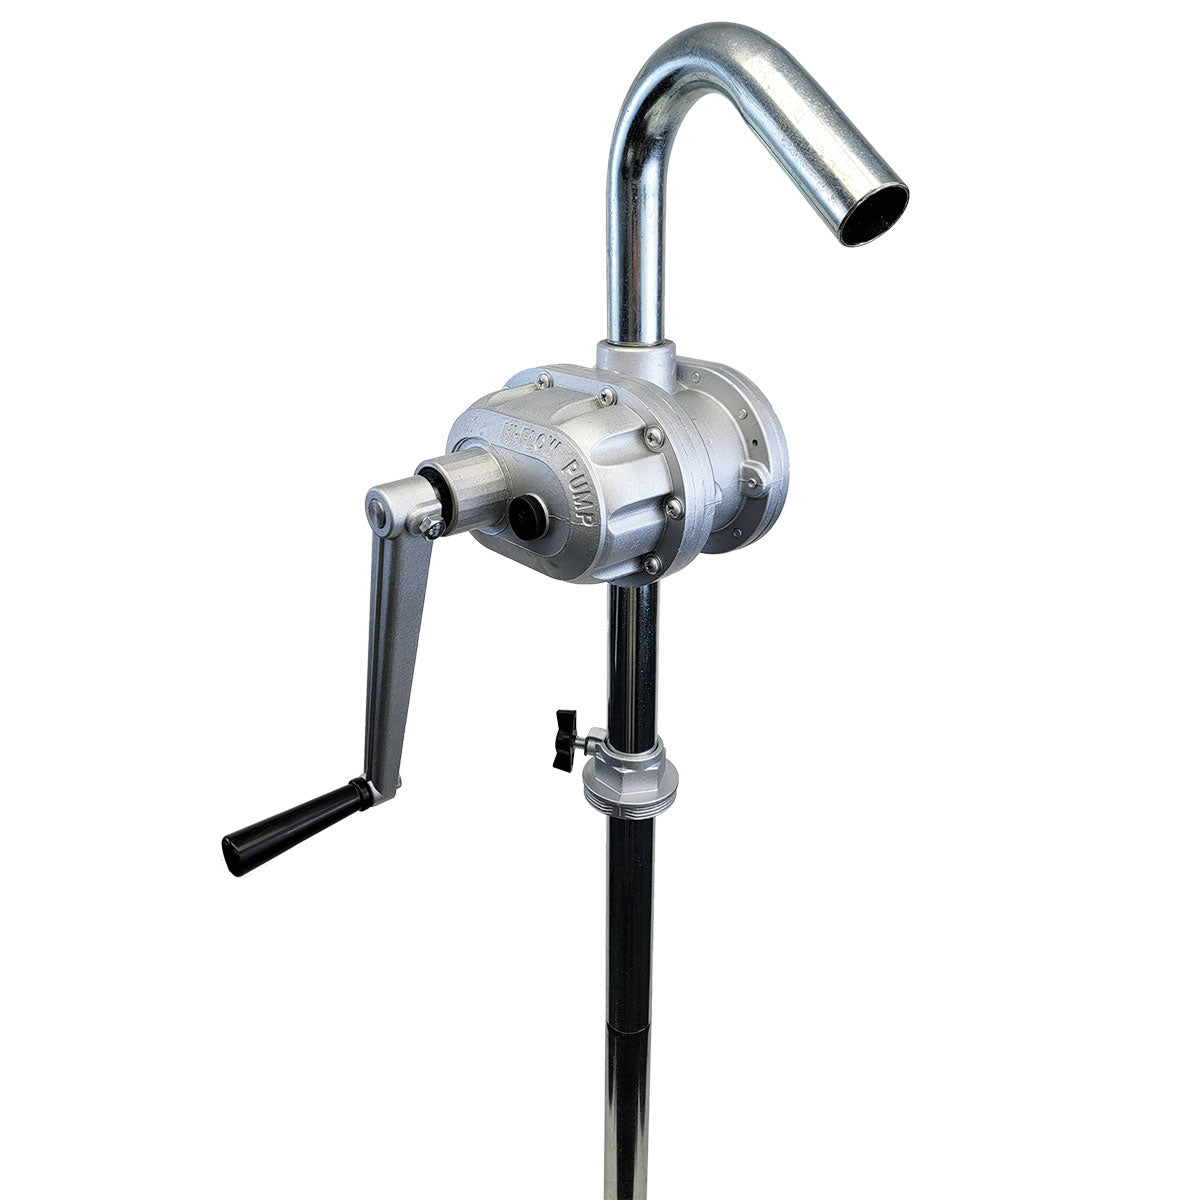 Wolflube Manual Oil Pump - Rotary - For 15 to 55 gal Drum - Free Flow Rate  1.30 gal/20 turns